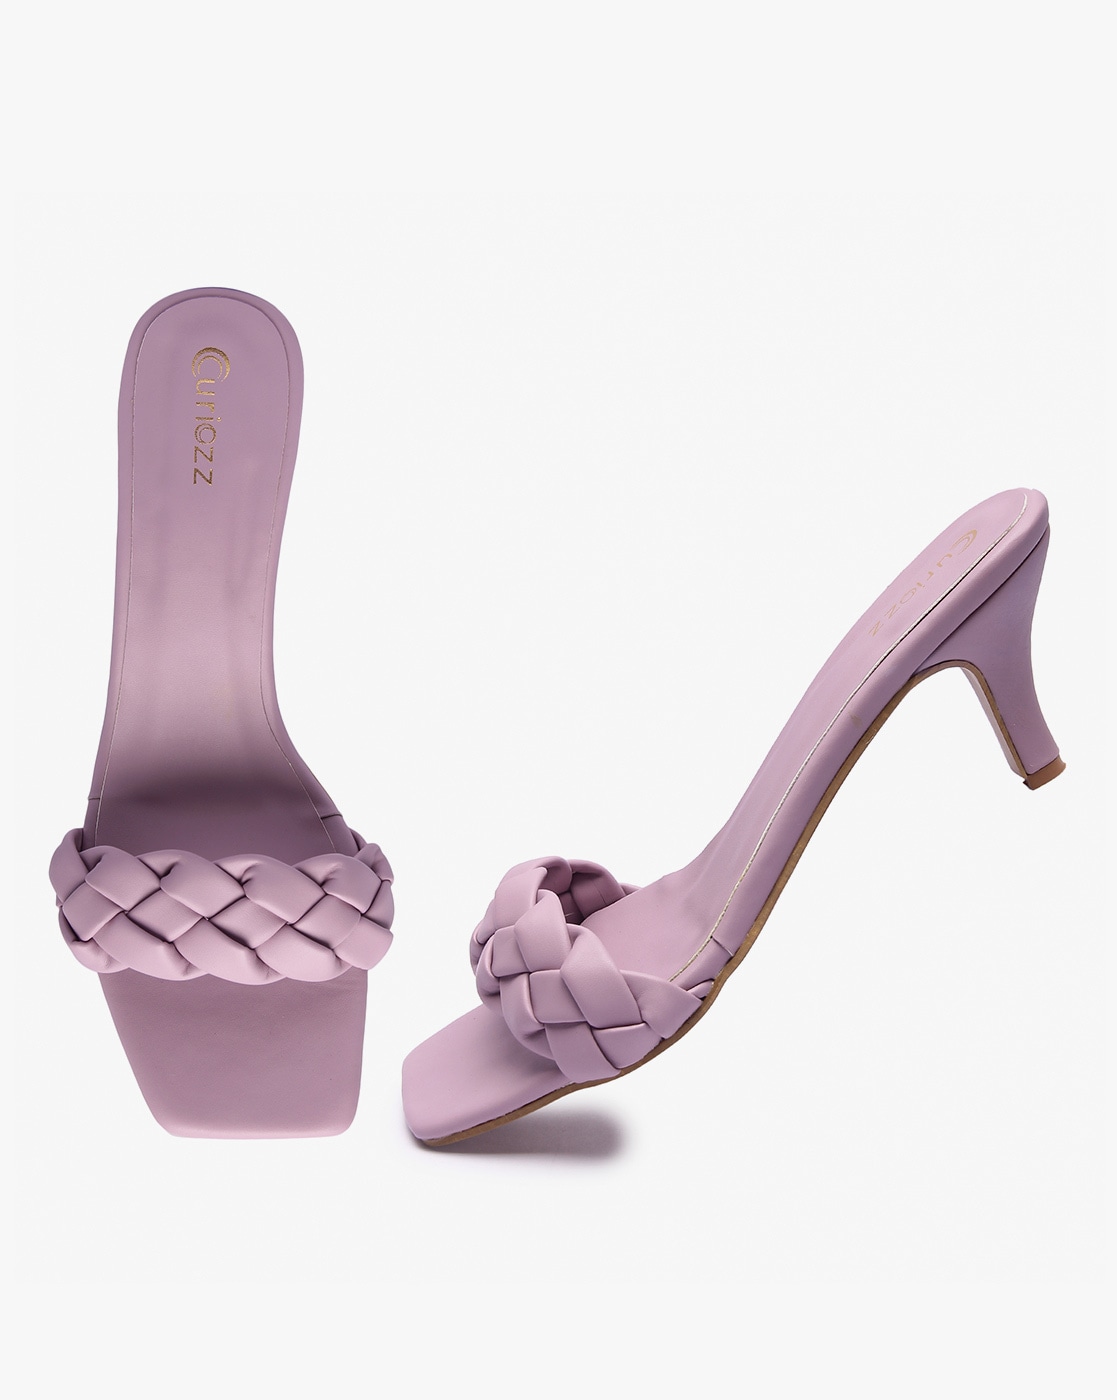 thewhitepole - Candyfloss || TWP Pencil Lilac Heel - The White Pole